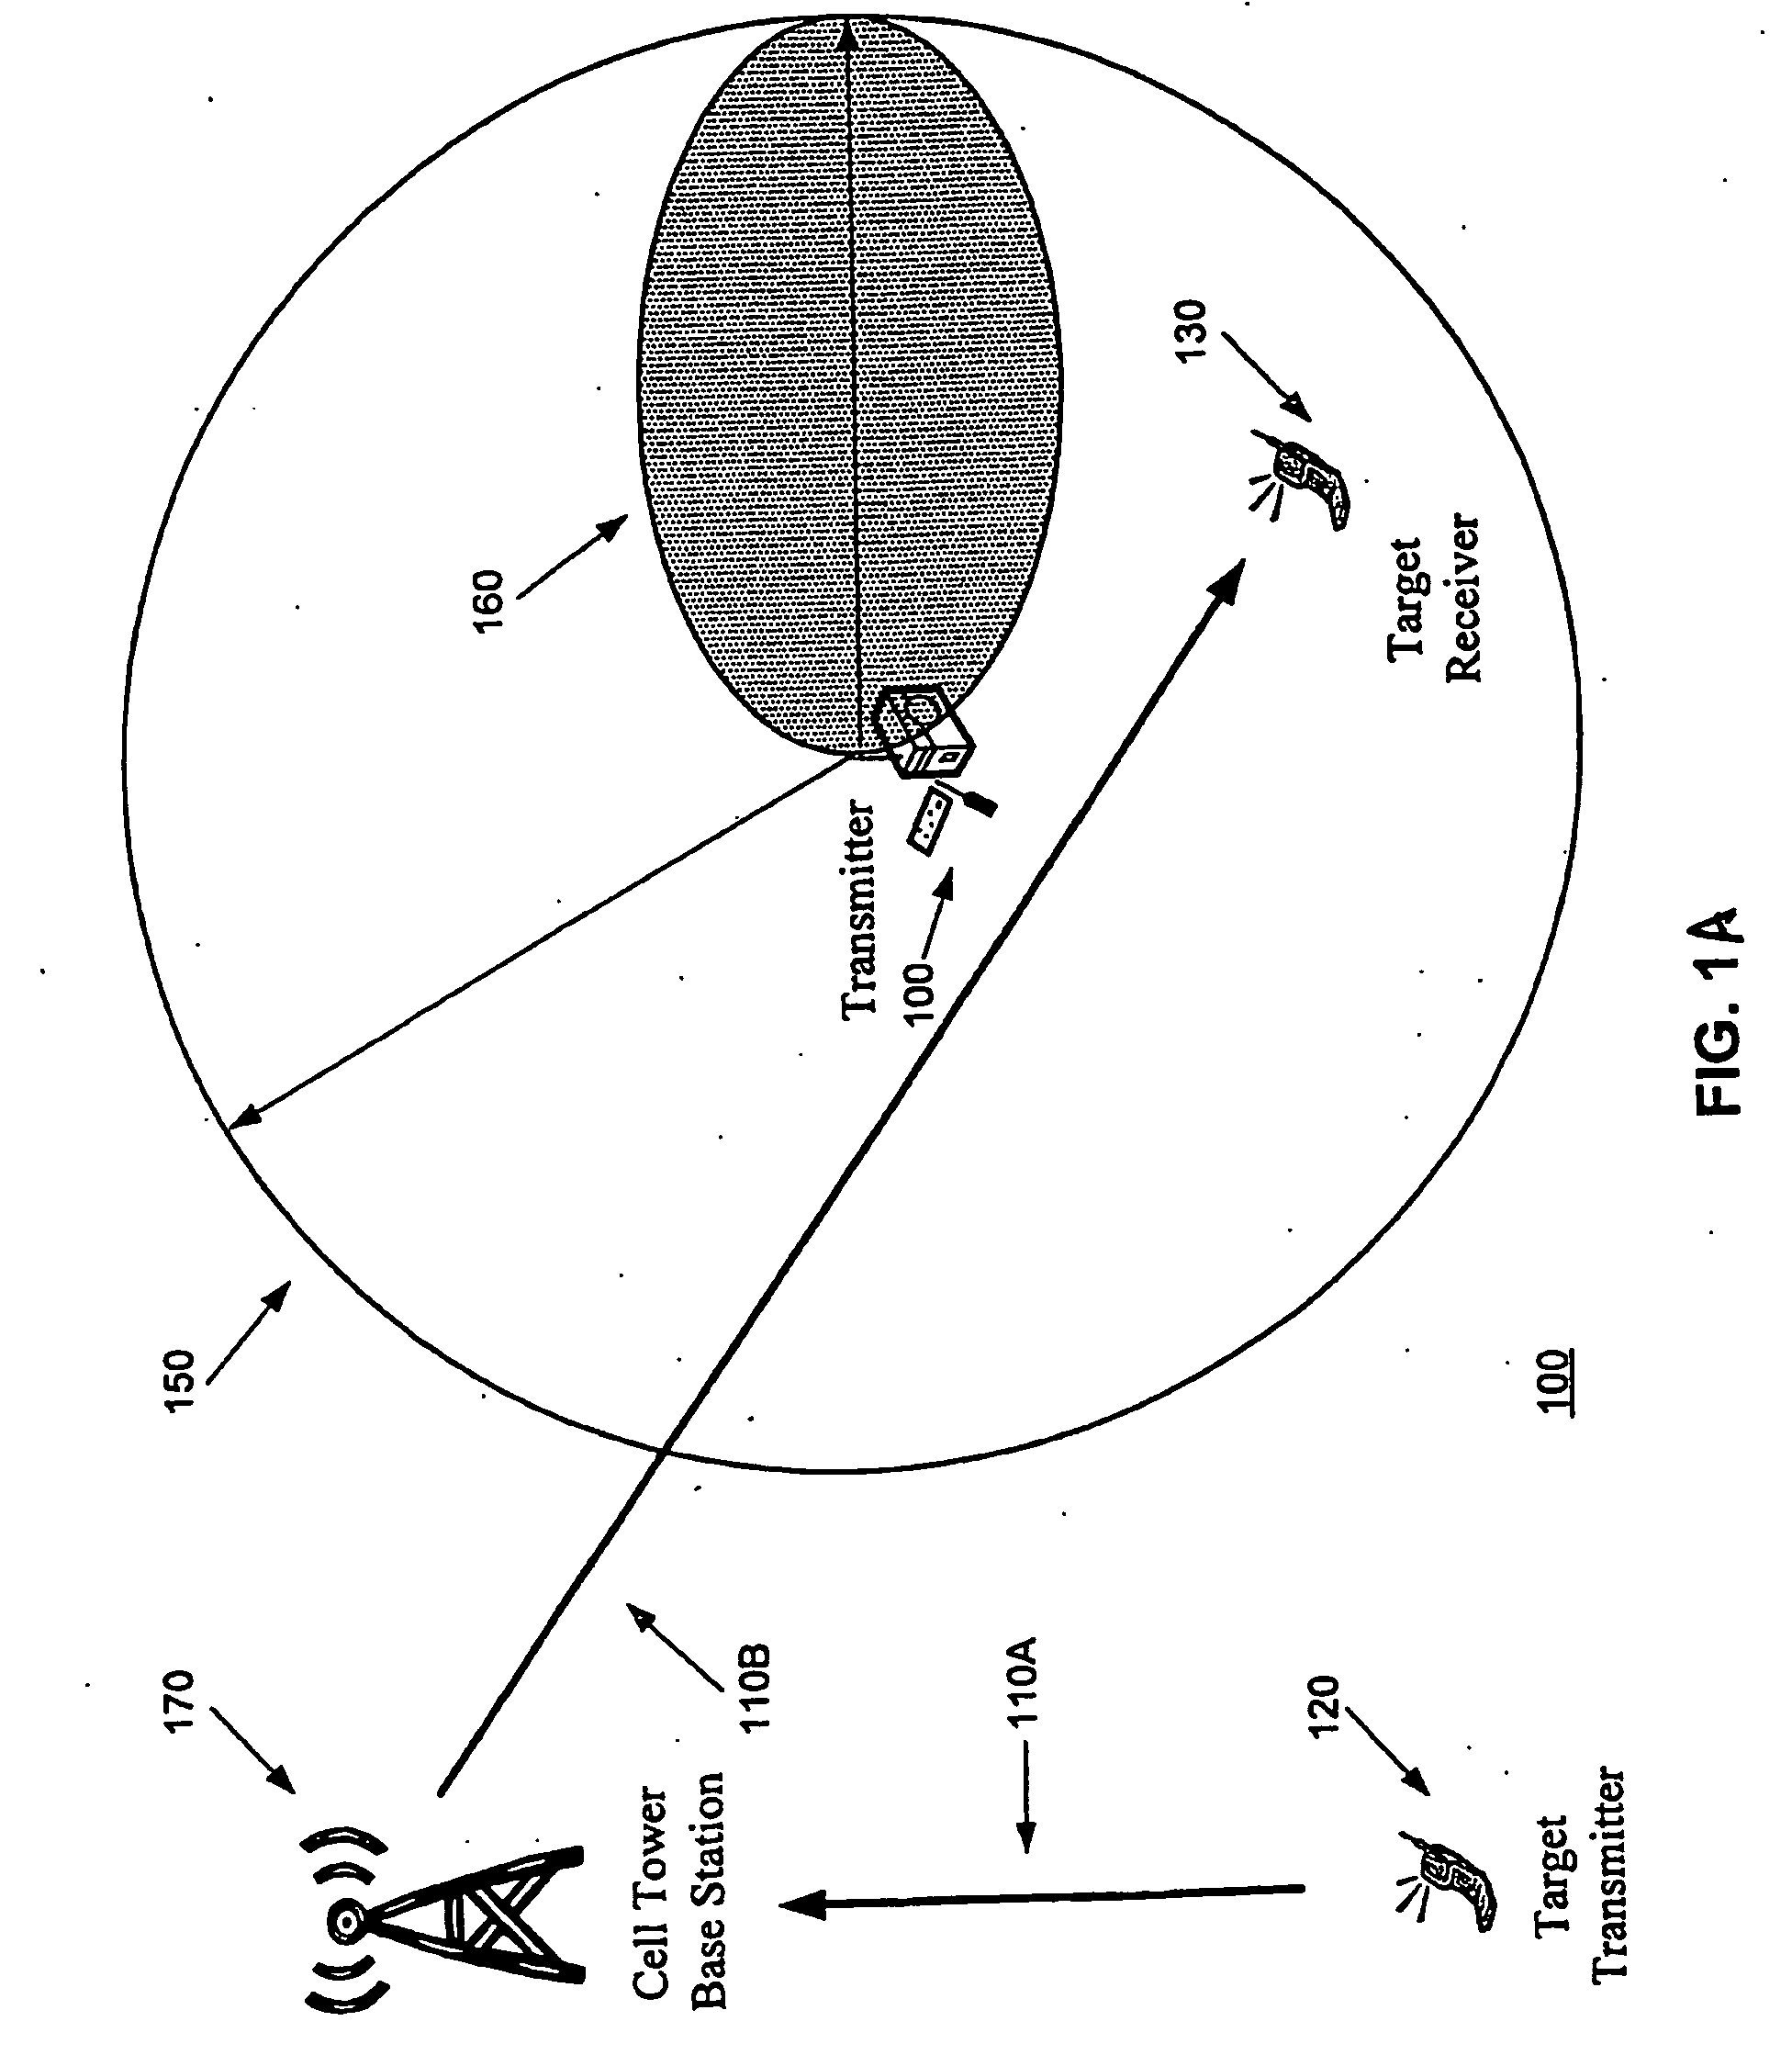 System and method for suppressing radio frequency transmissions